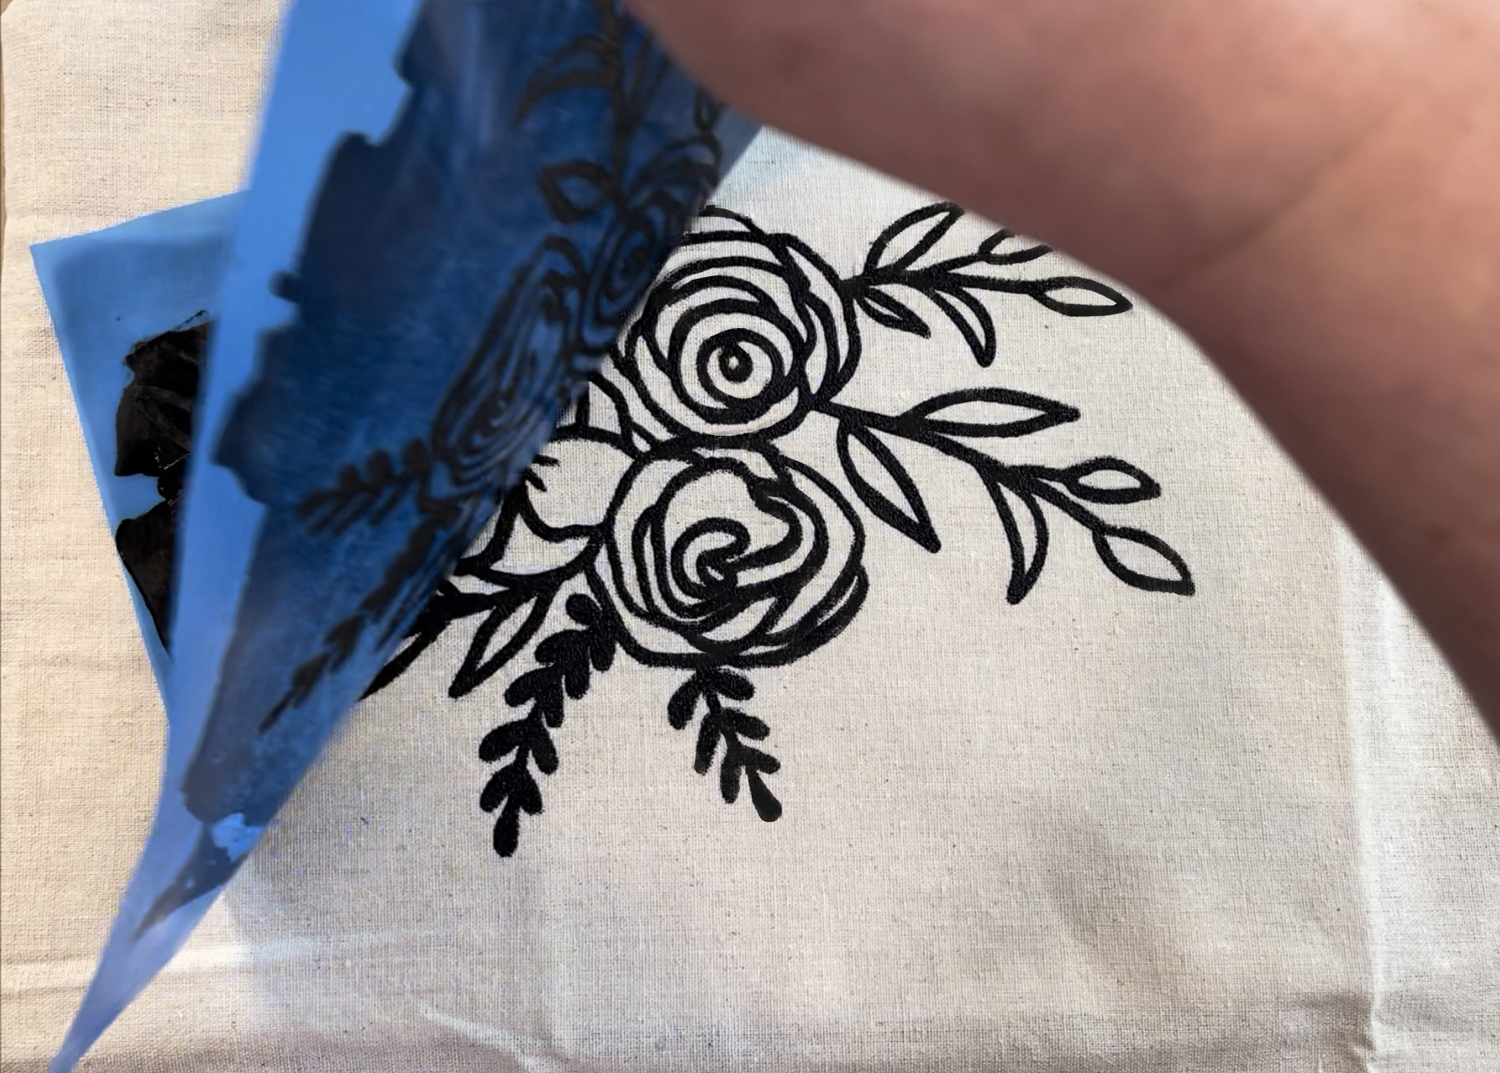 Stenciling on Fabric